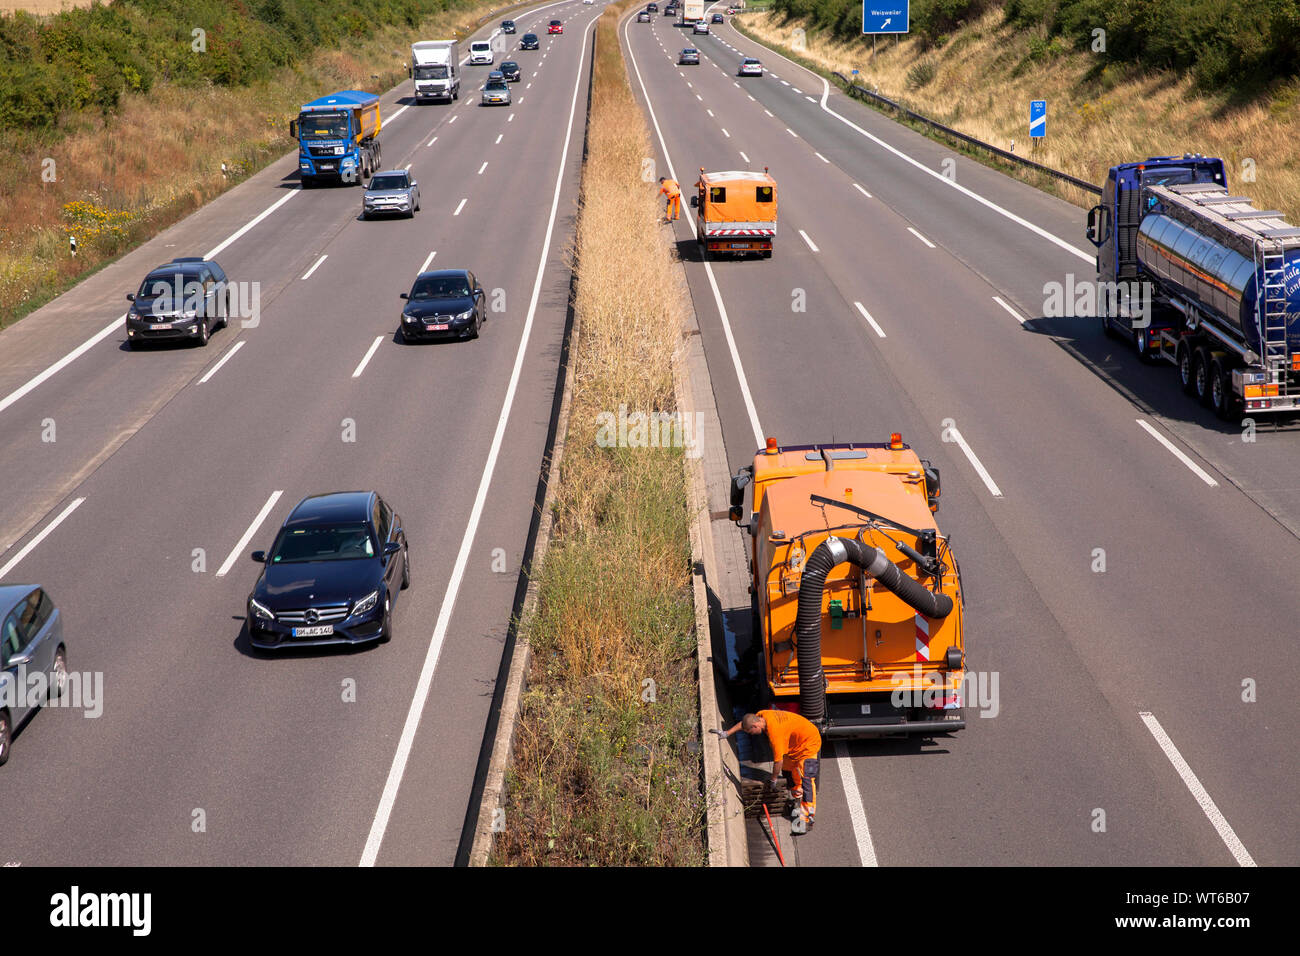 workers of the motorway maintenance authorities clean the inlet grids on Autobahn A4 in Eschweiler-Weisweiler, North Rhine-Westphalia, Germany.  Arbei Stock Photo